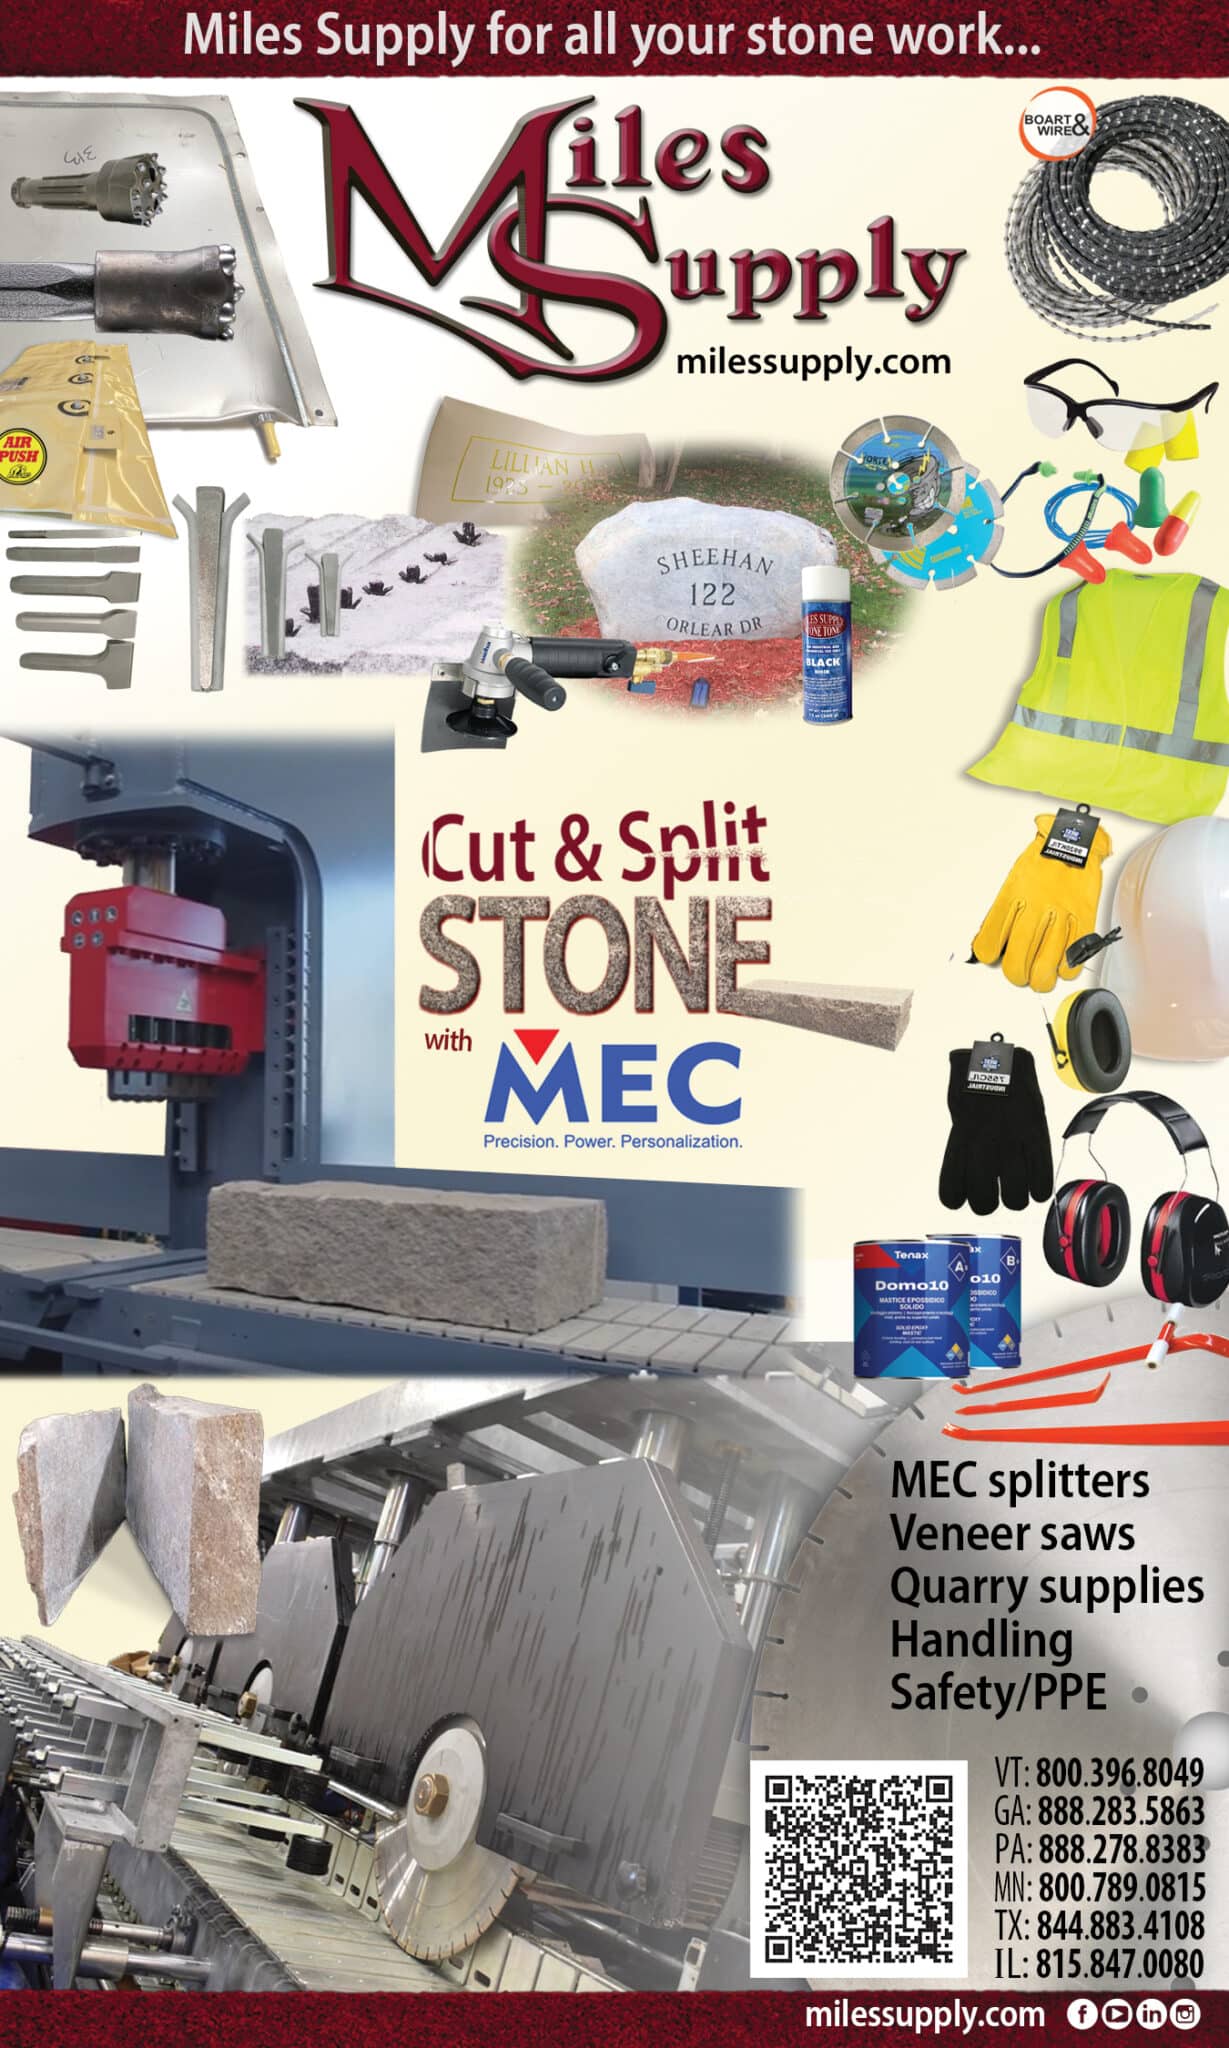 Hardscape supplies from Miles Supply